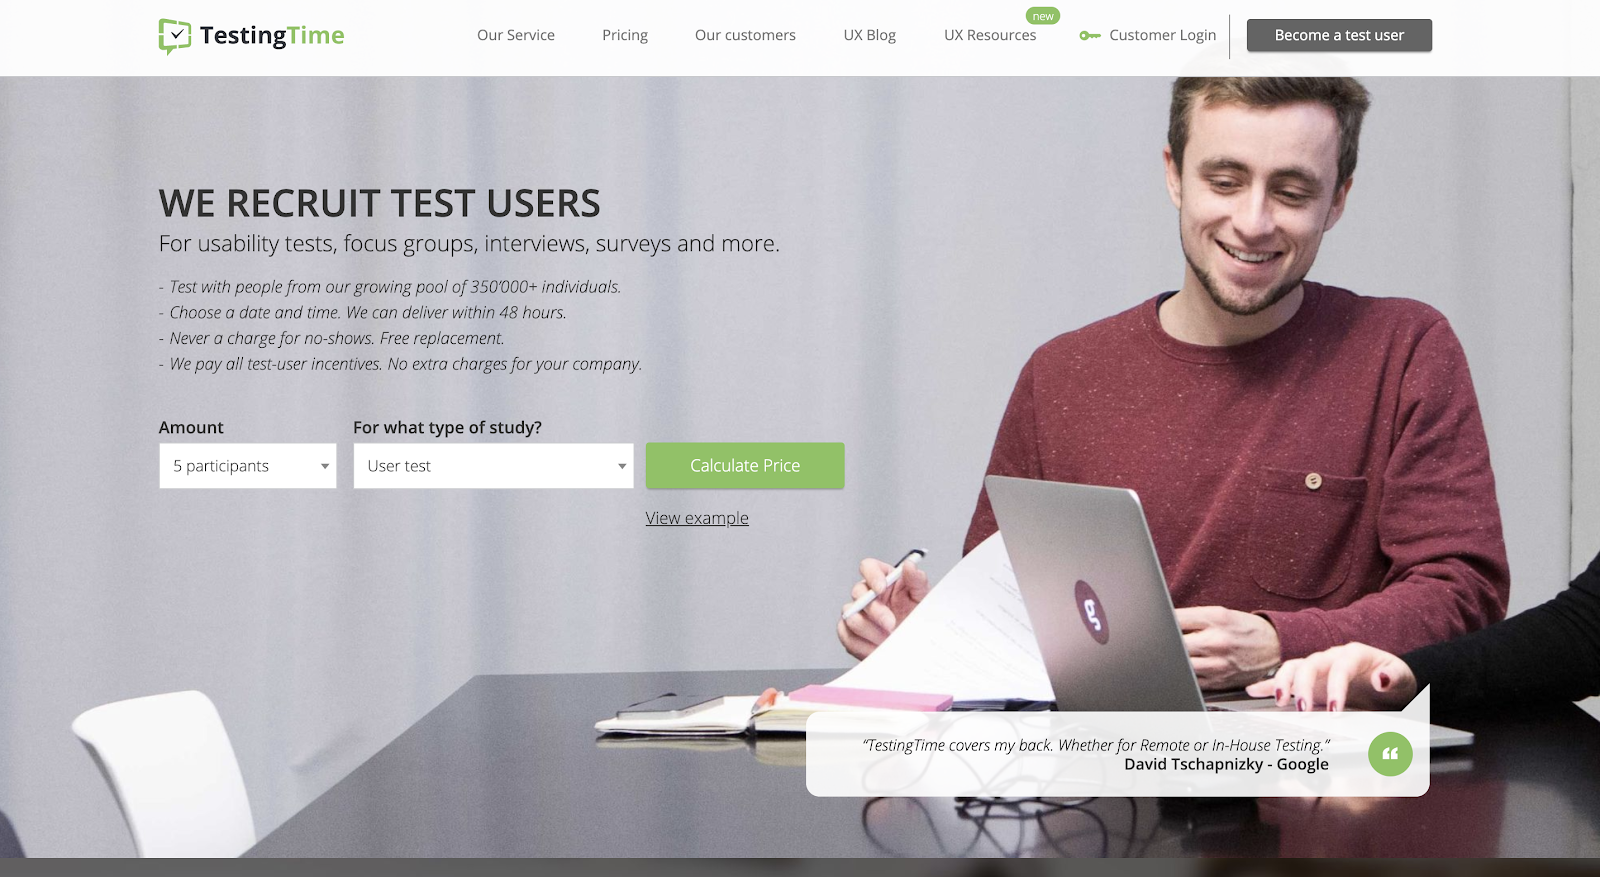 TestingTime as a UX research toolbox